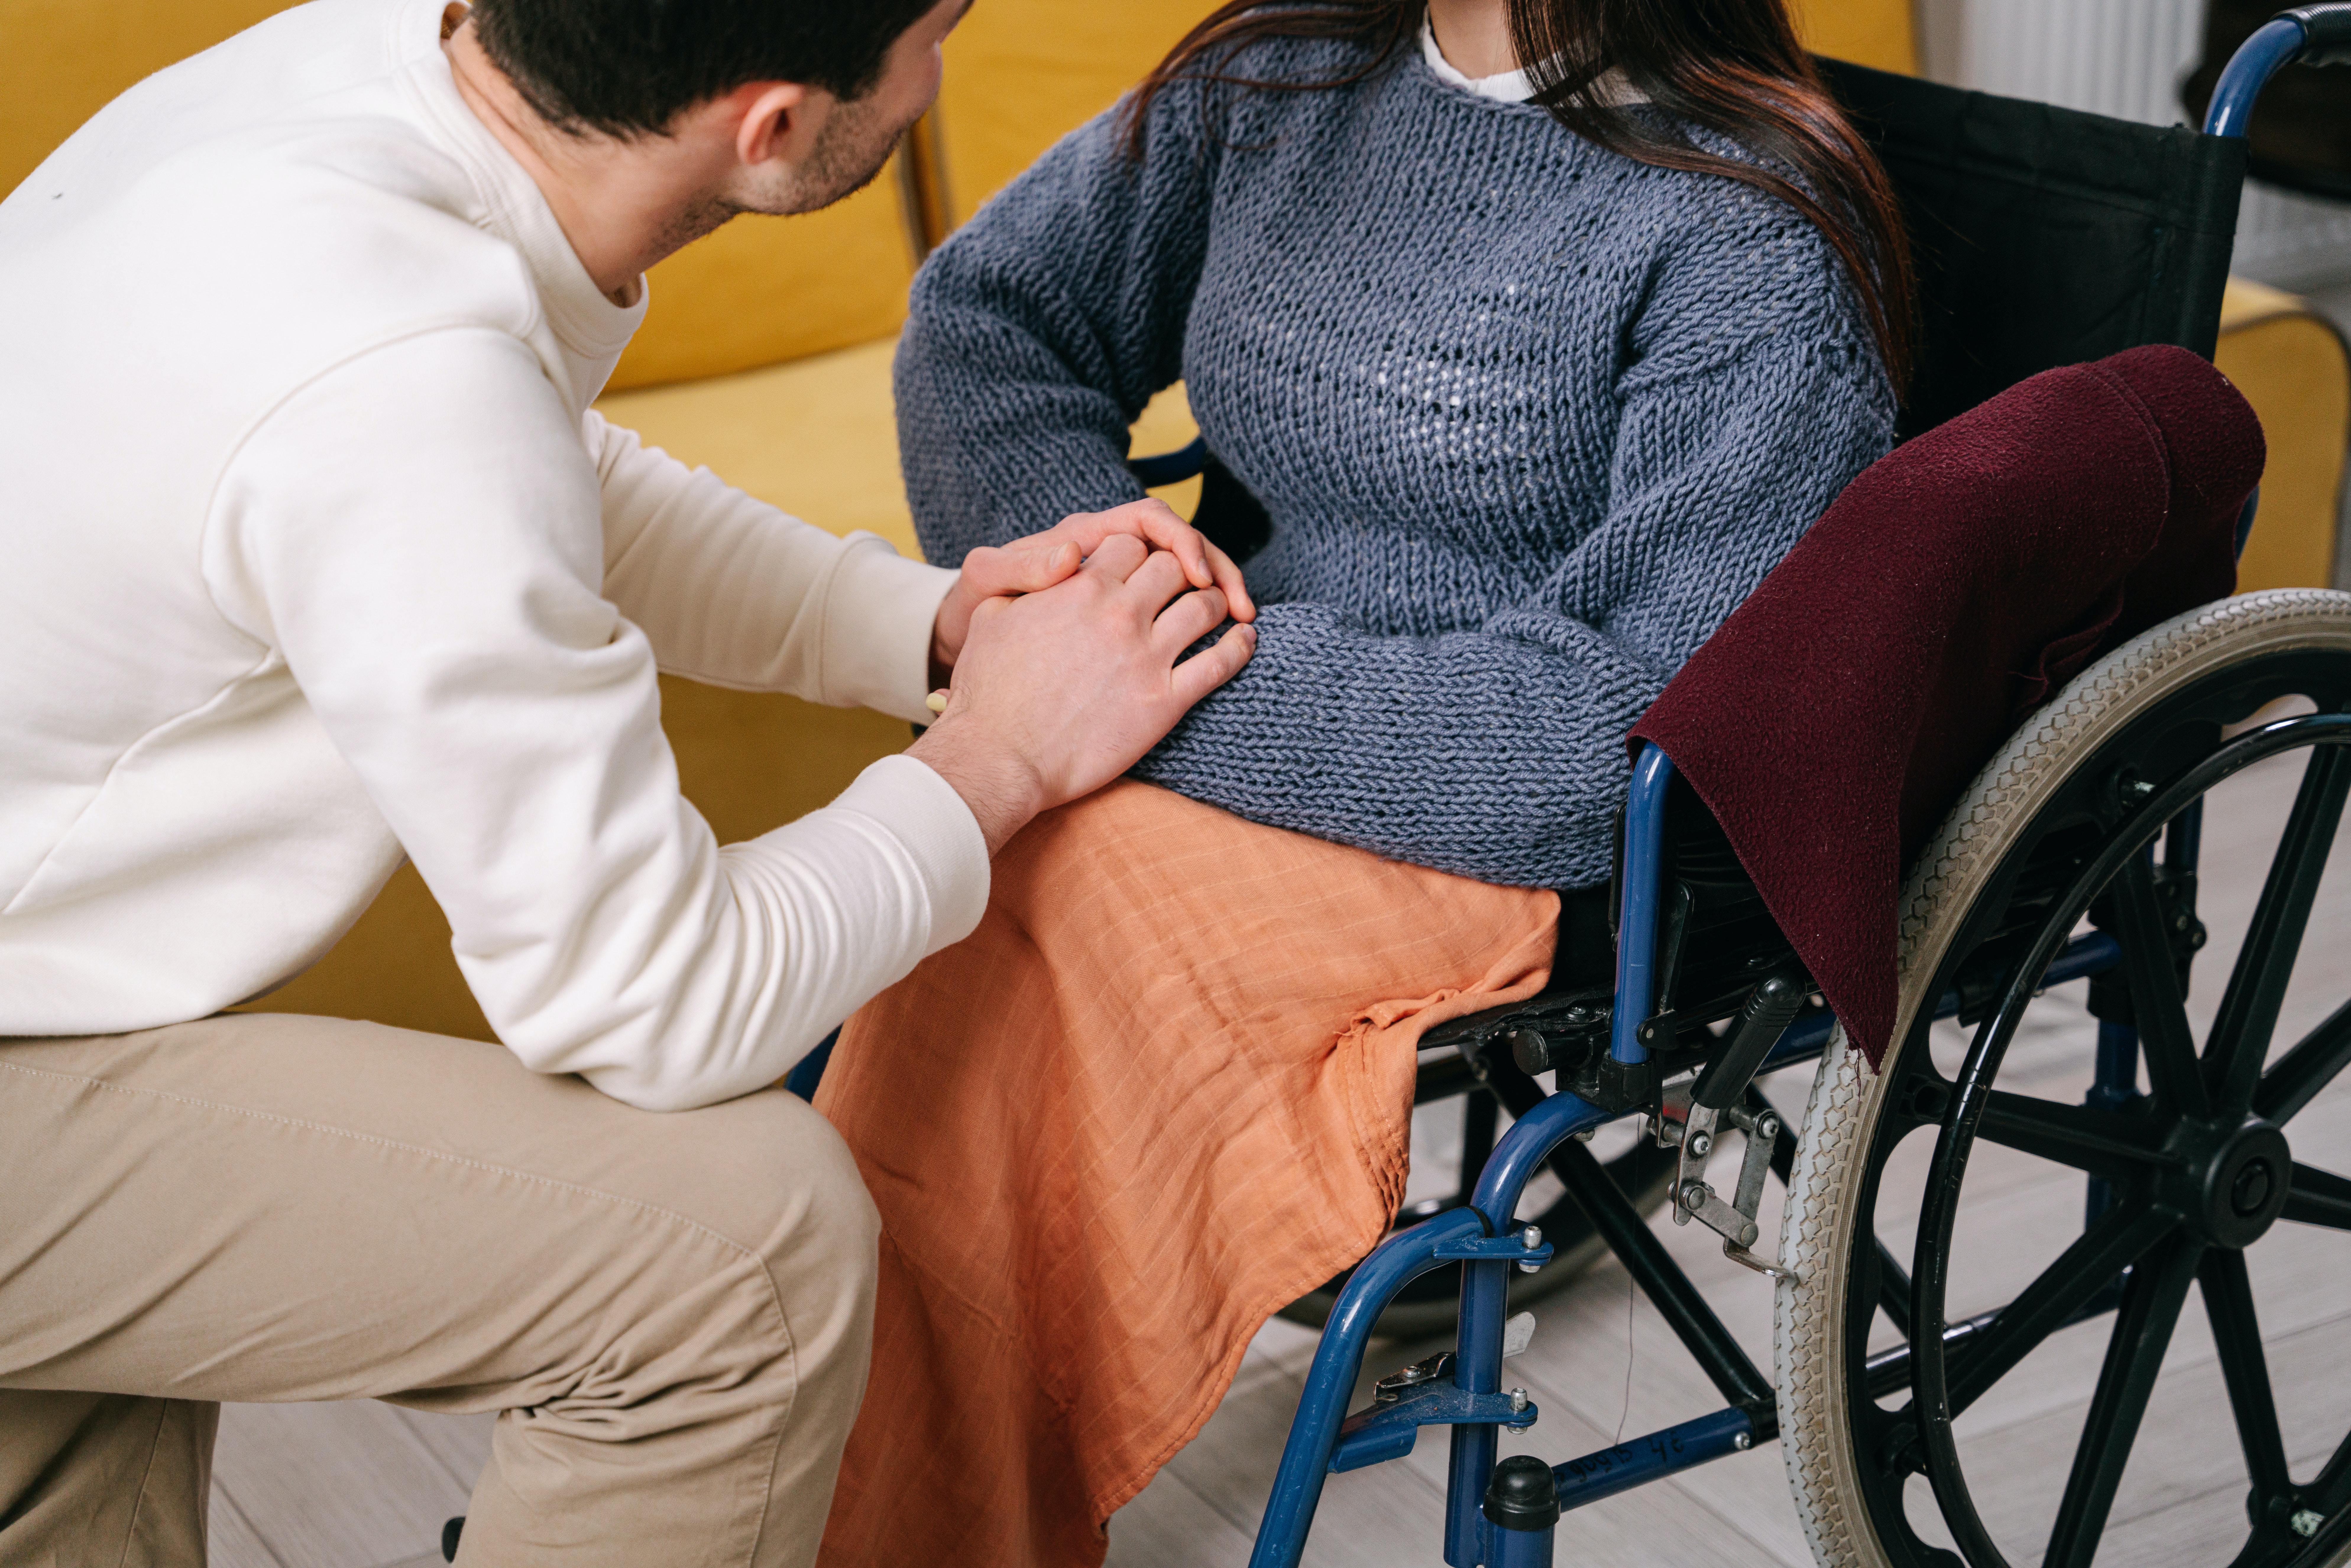 Caring for Caregivers: Ideas to Keep in Mind for Those Supporting PWDs